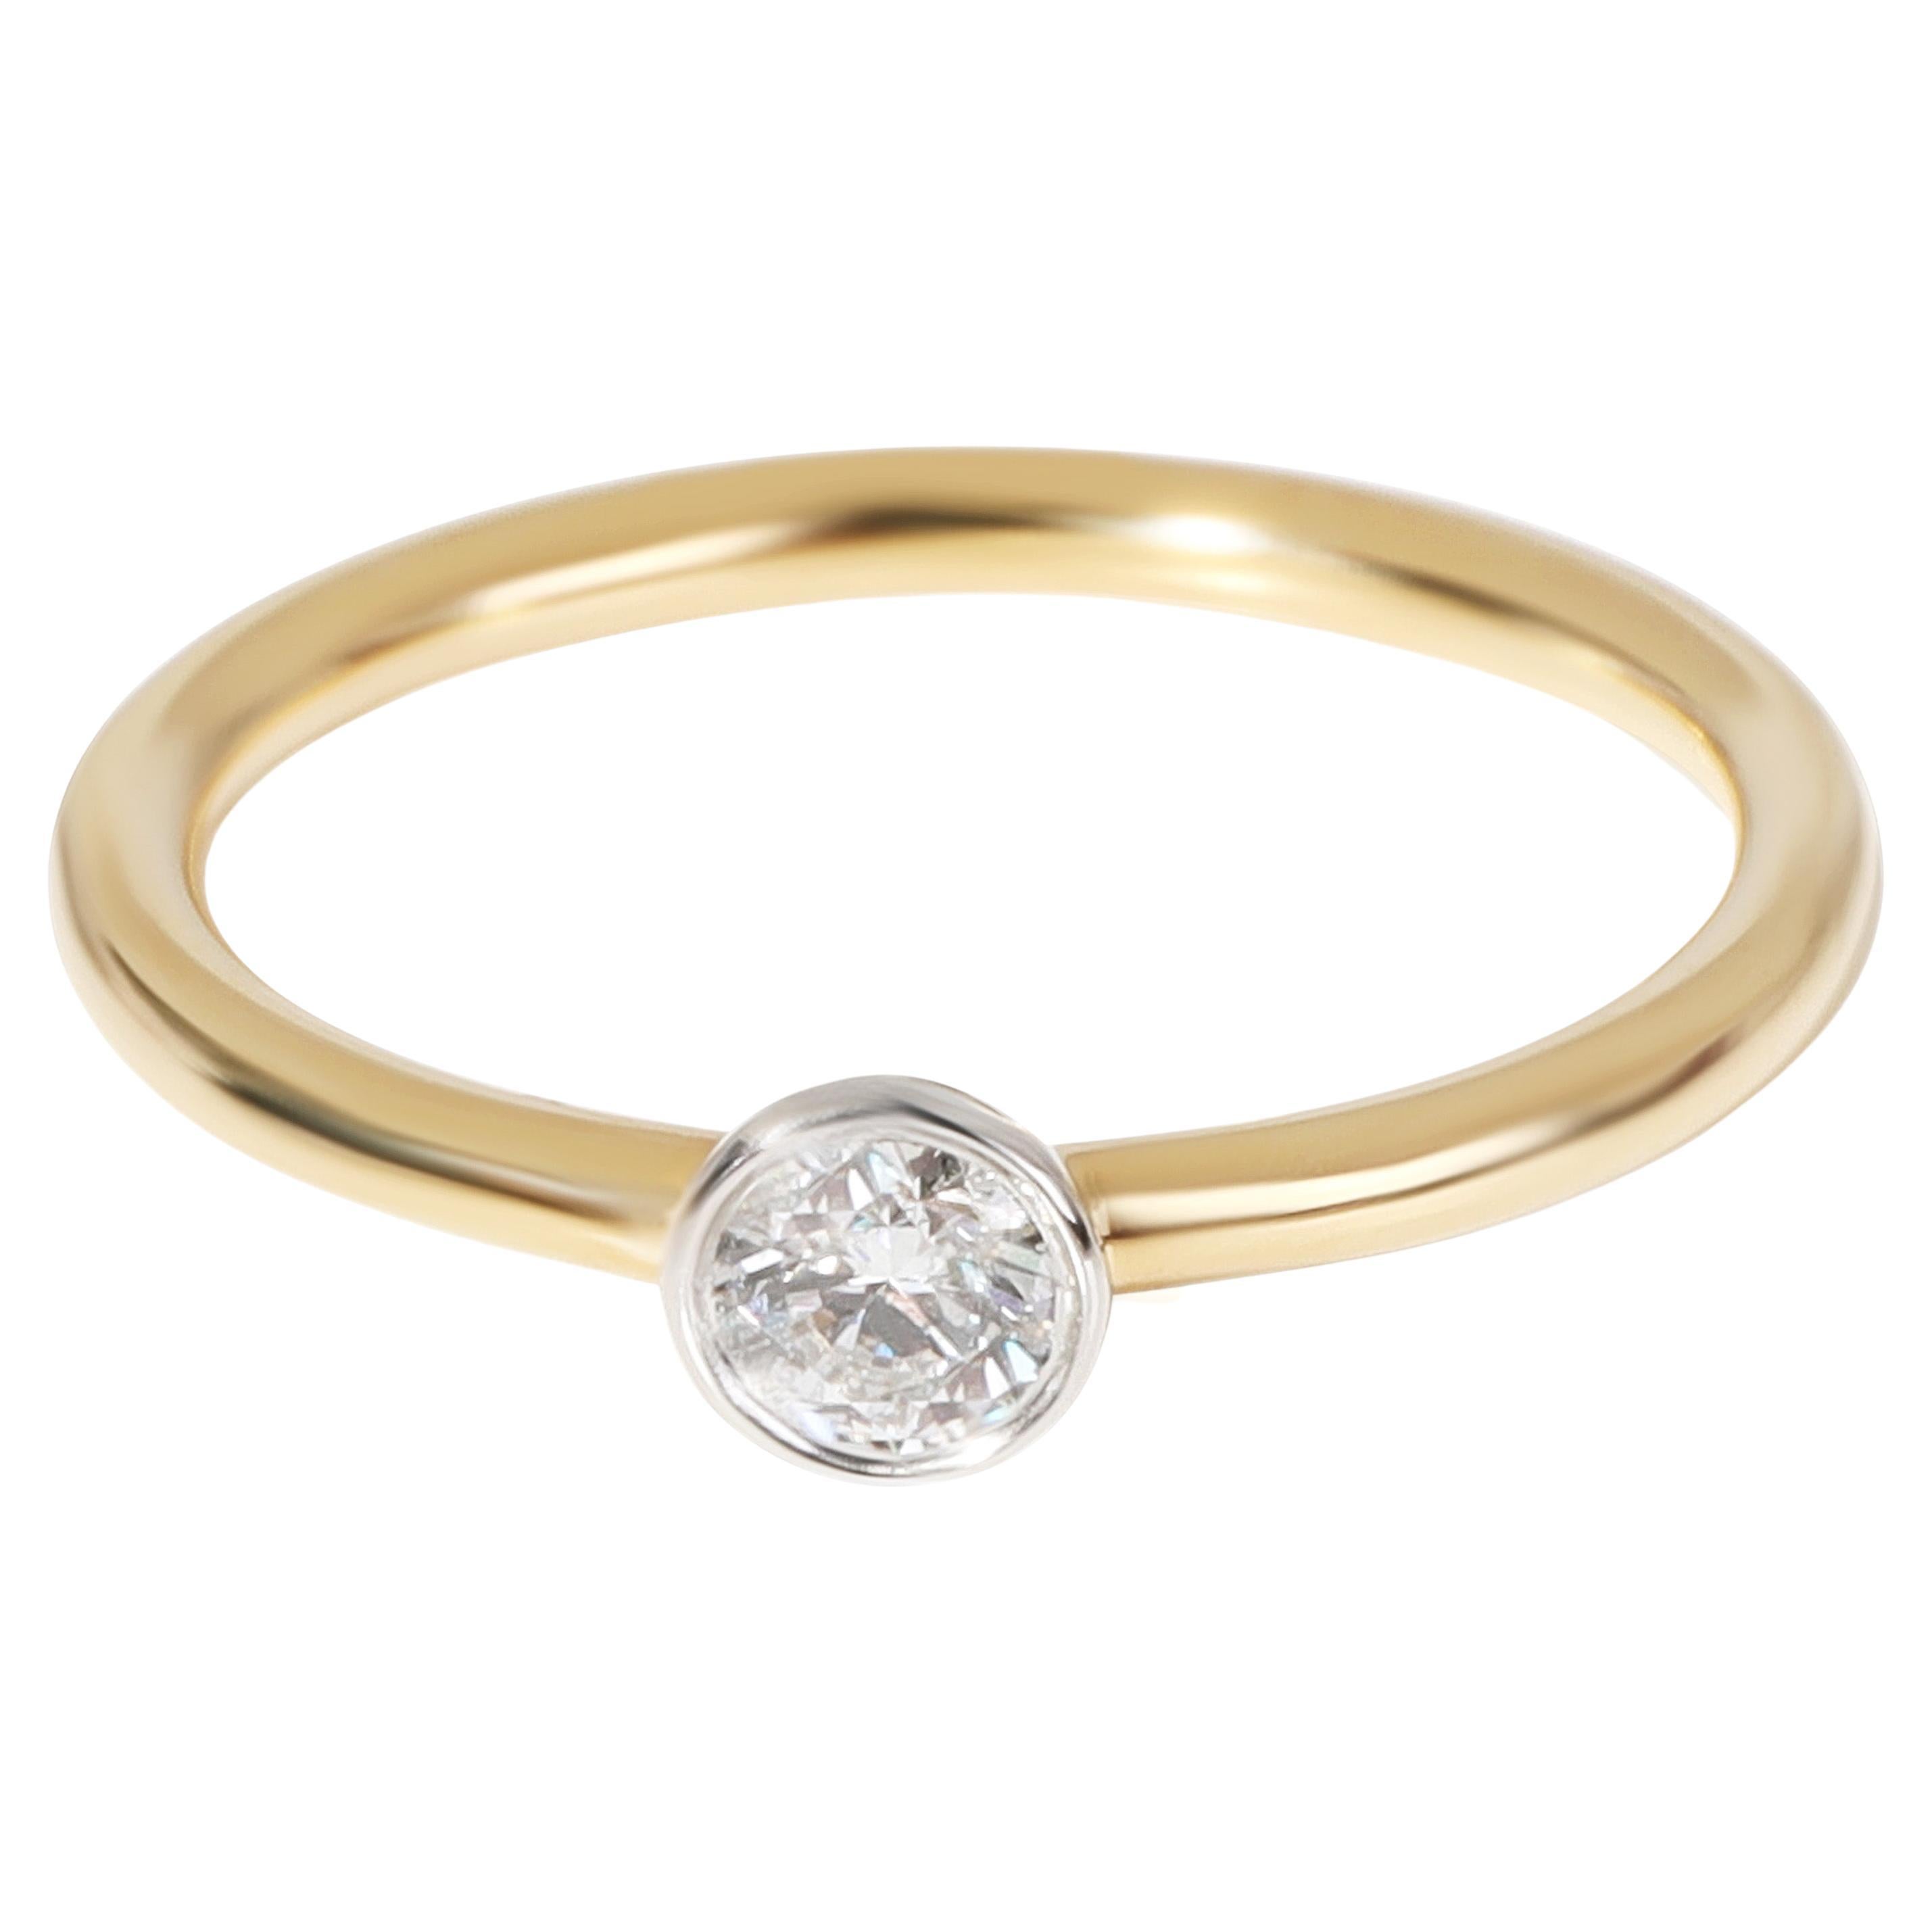 Tiffany & Co. Stackable Diamond Solitaire Ring  in 18K Yellow Gold